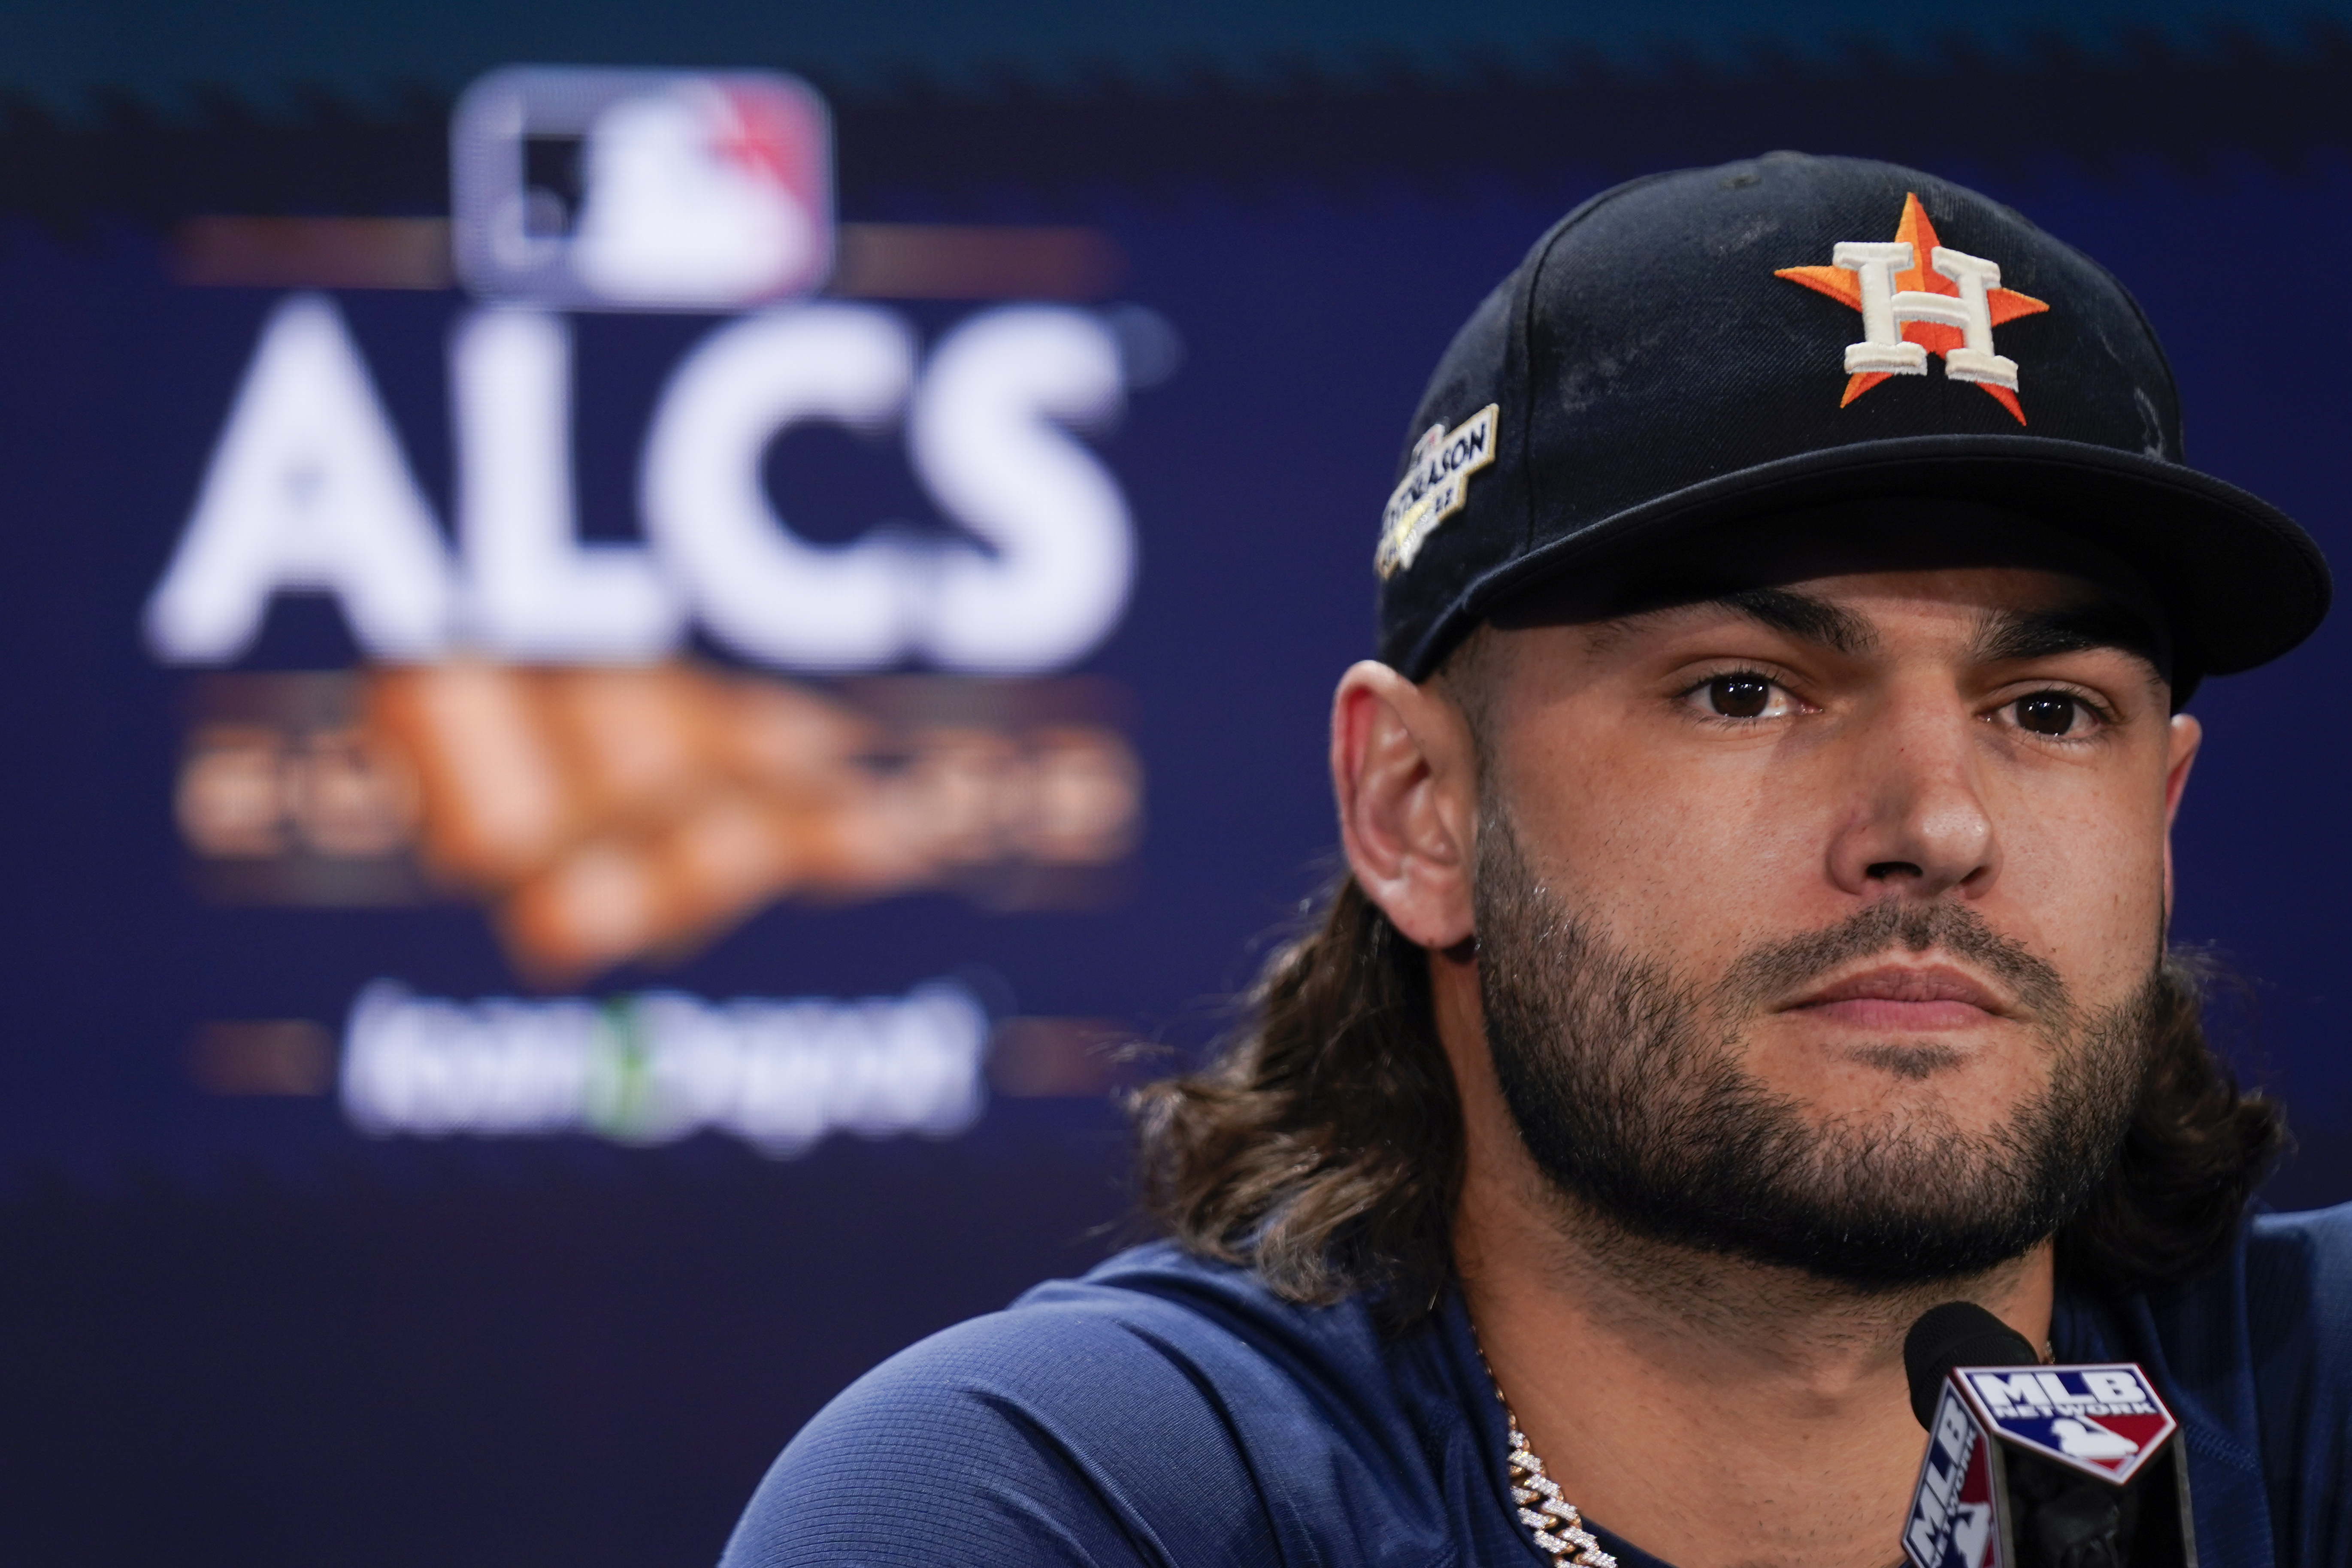 Houston Astros pitcher Lance McCullers Jr. launches Maven Coffee +